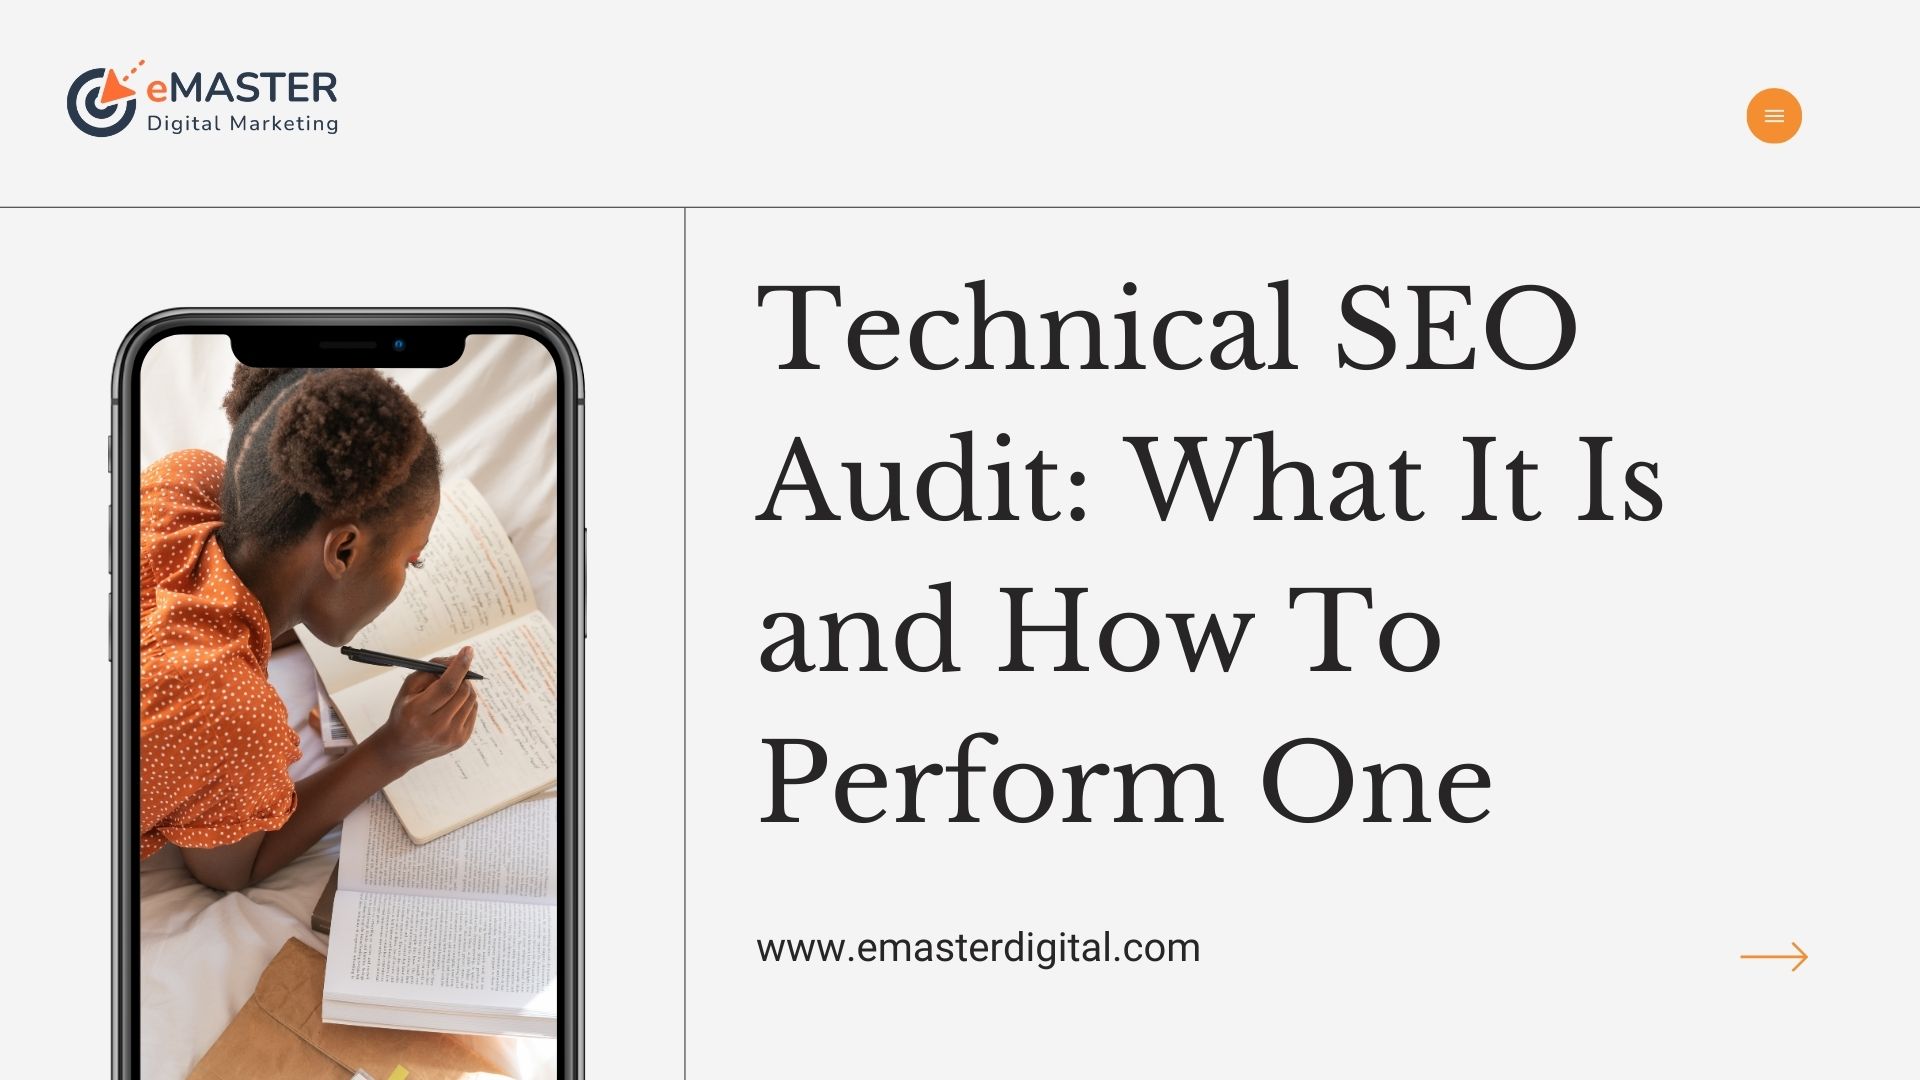 Technical SEO Audit: What It Is and How To Perform One